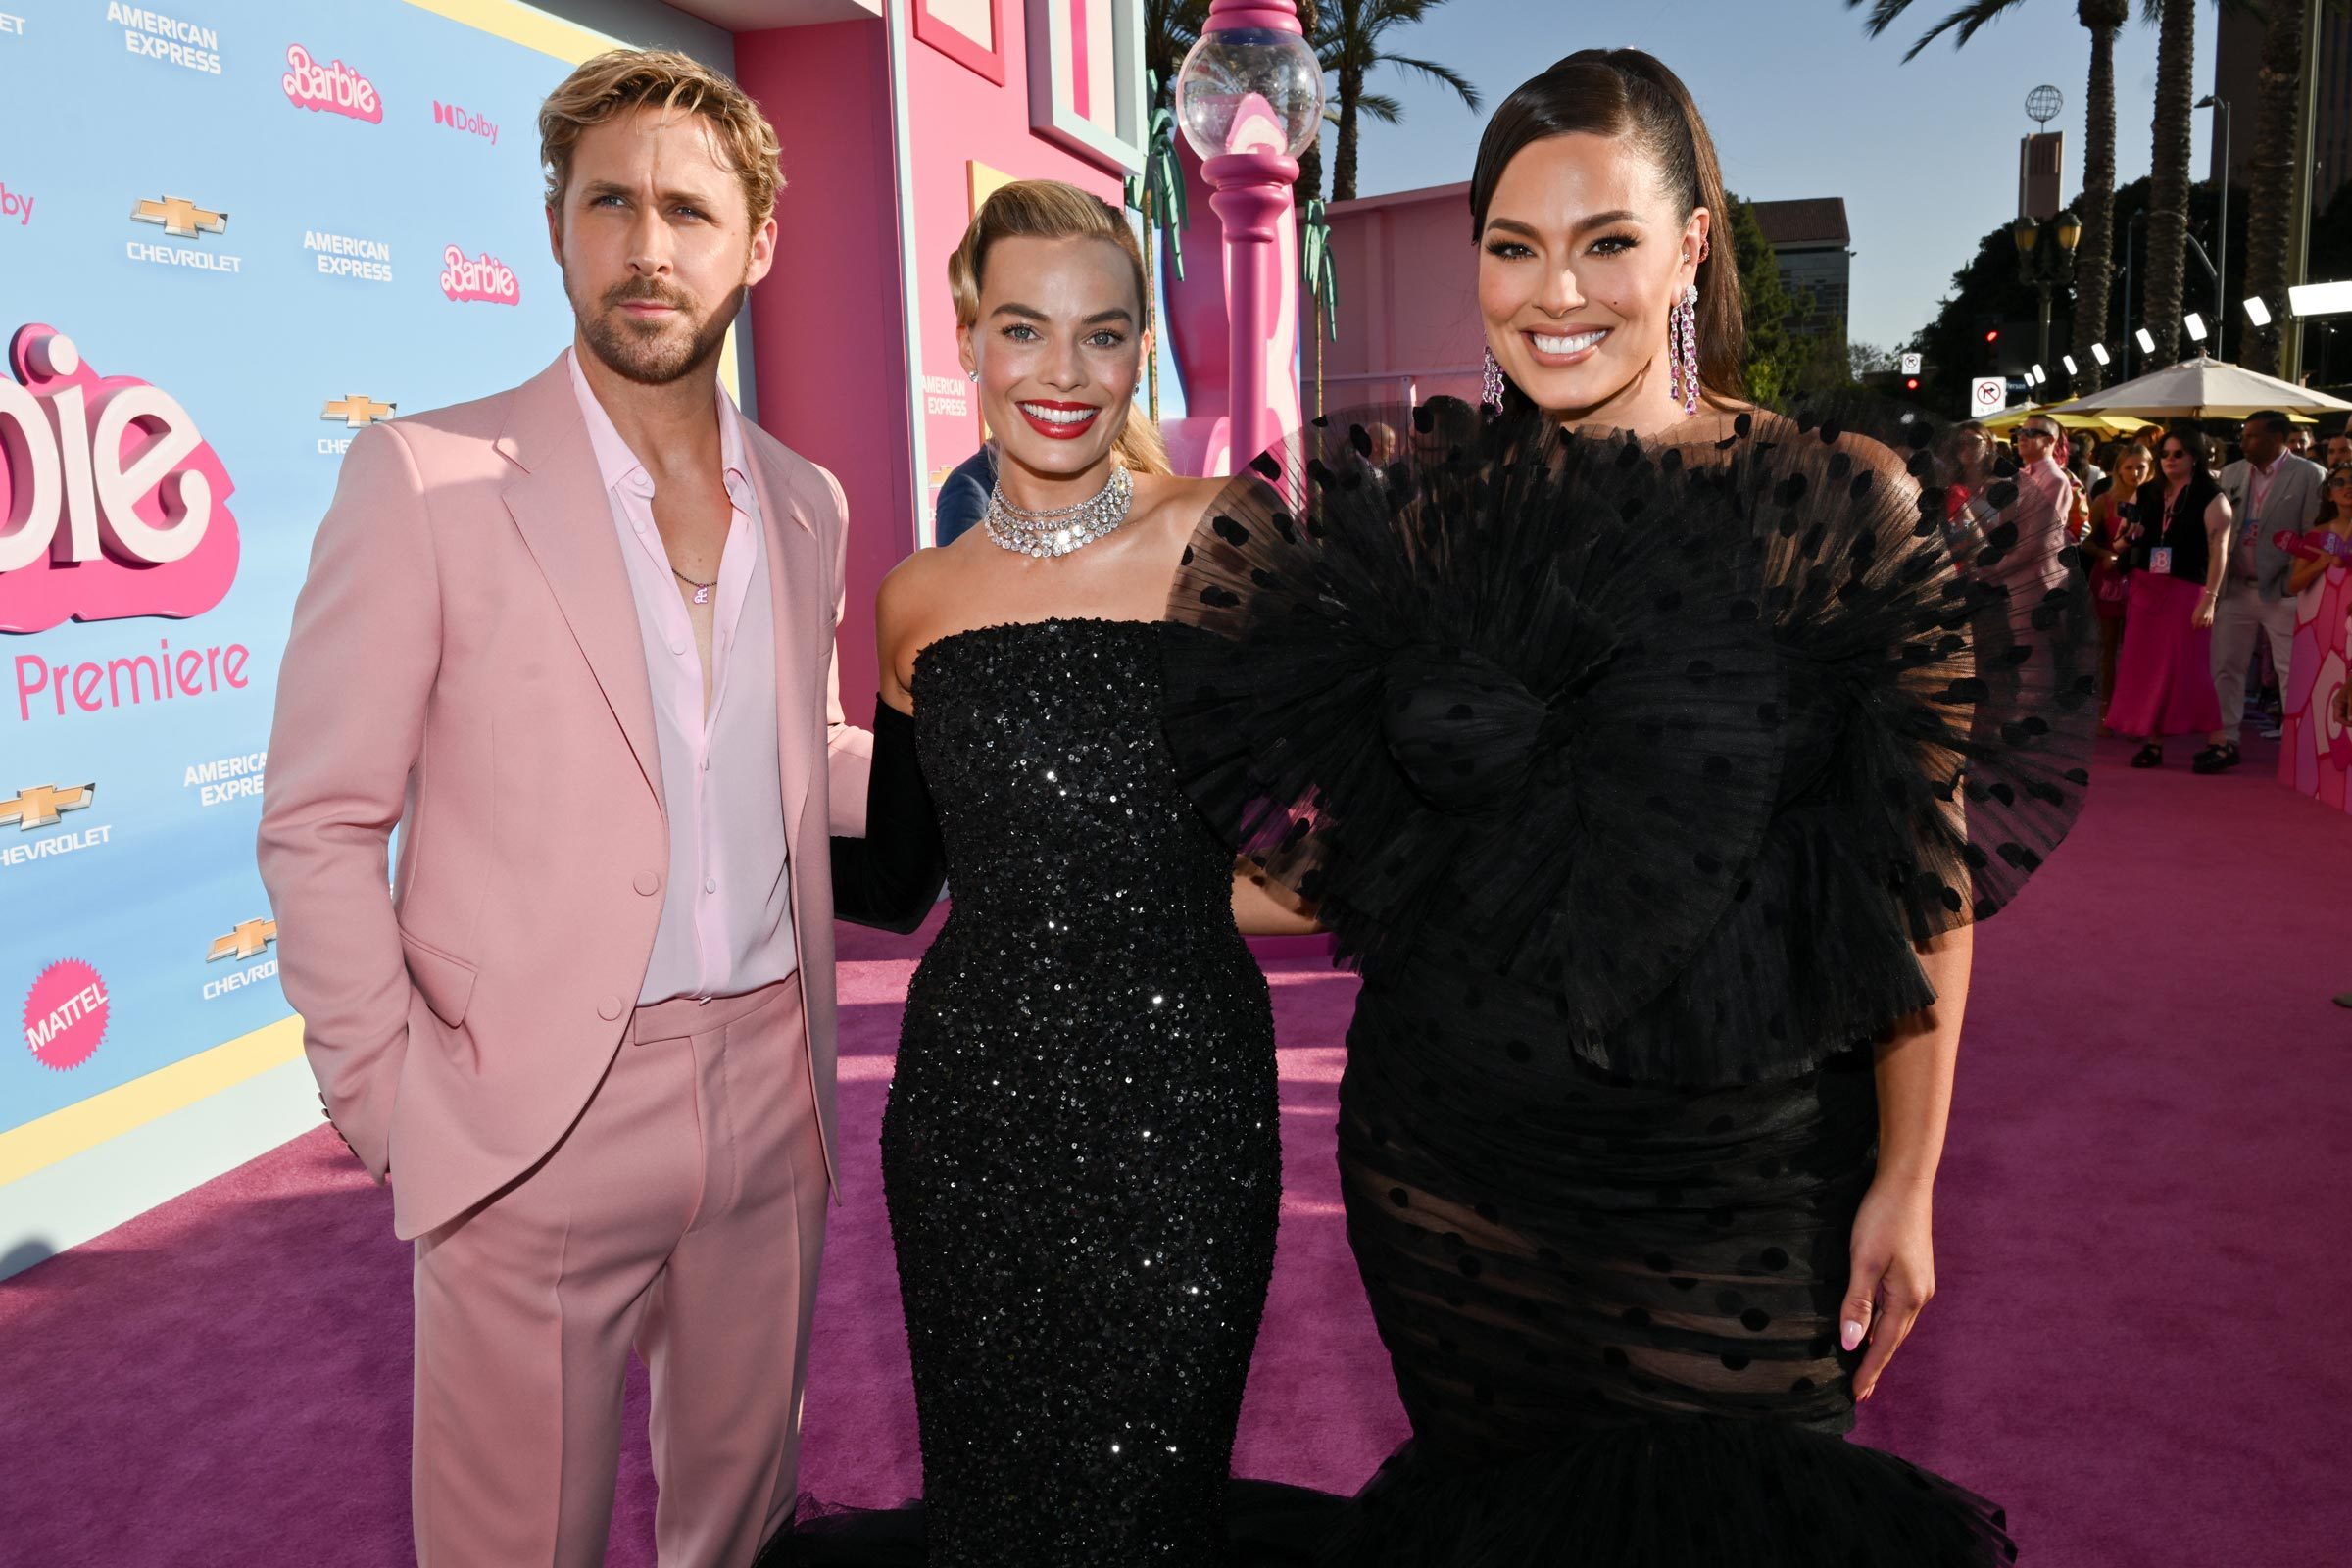 Ryan Gosling, Margot Robbie and Ashley Graham at the premiere of "Barbie" held at Shrine Auditorium and Expo Hall on July 9, 2023